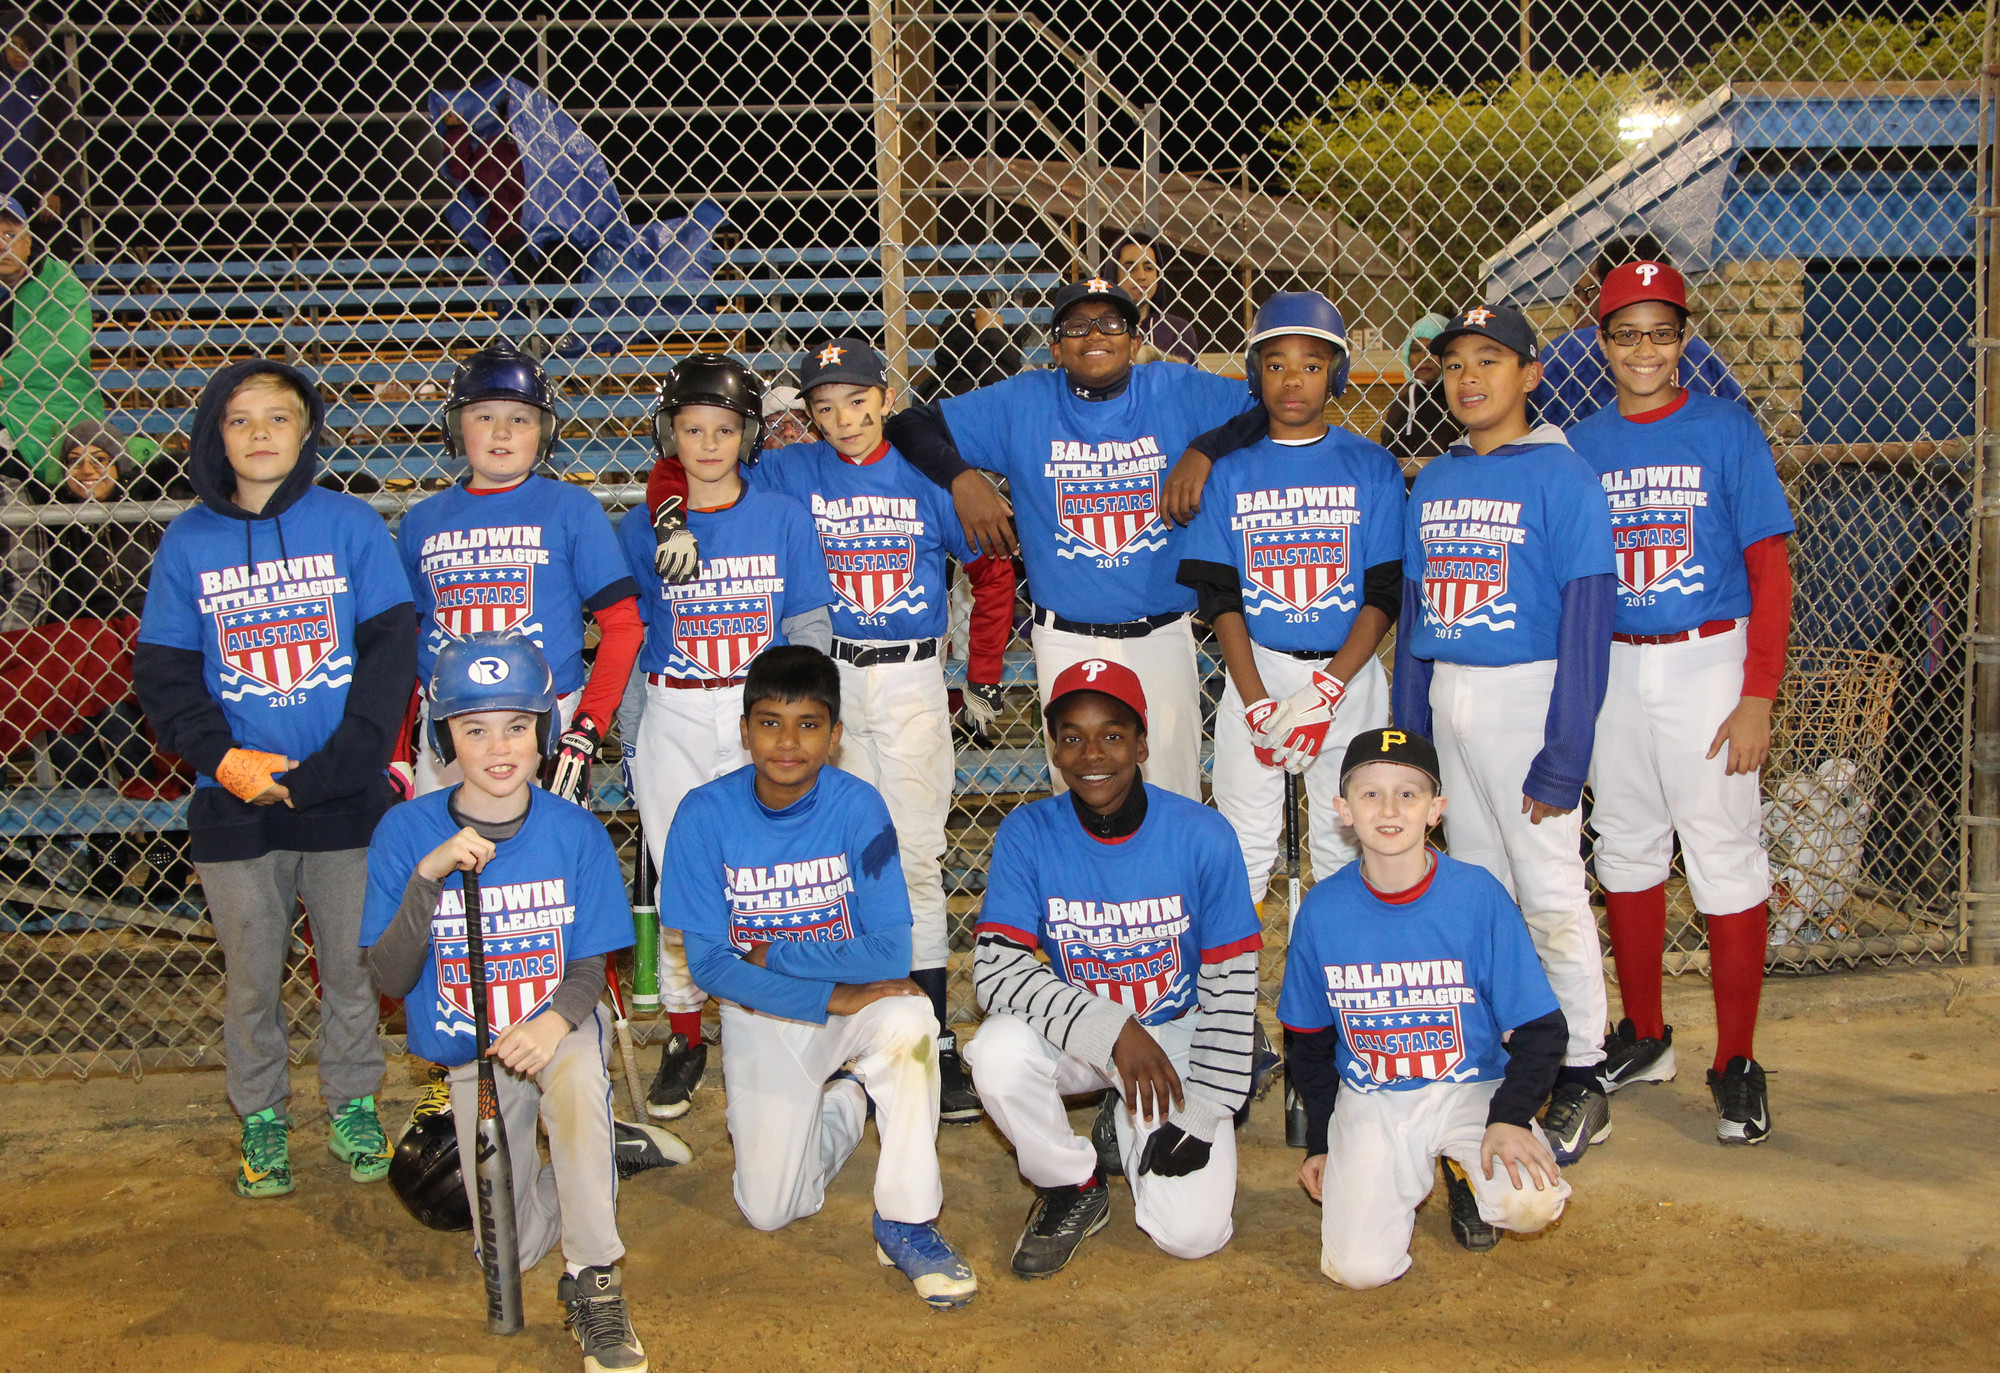 Baldwin Little League All-Stars faced off on May 23 at Baldwin Park. Pictured were 11 and 12 years olds on the blue team who gathered before taking the field.